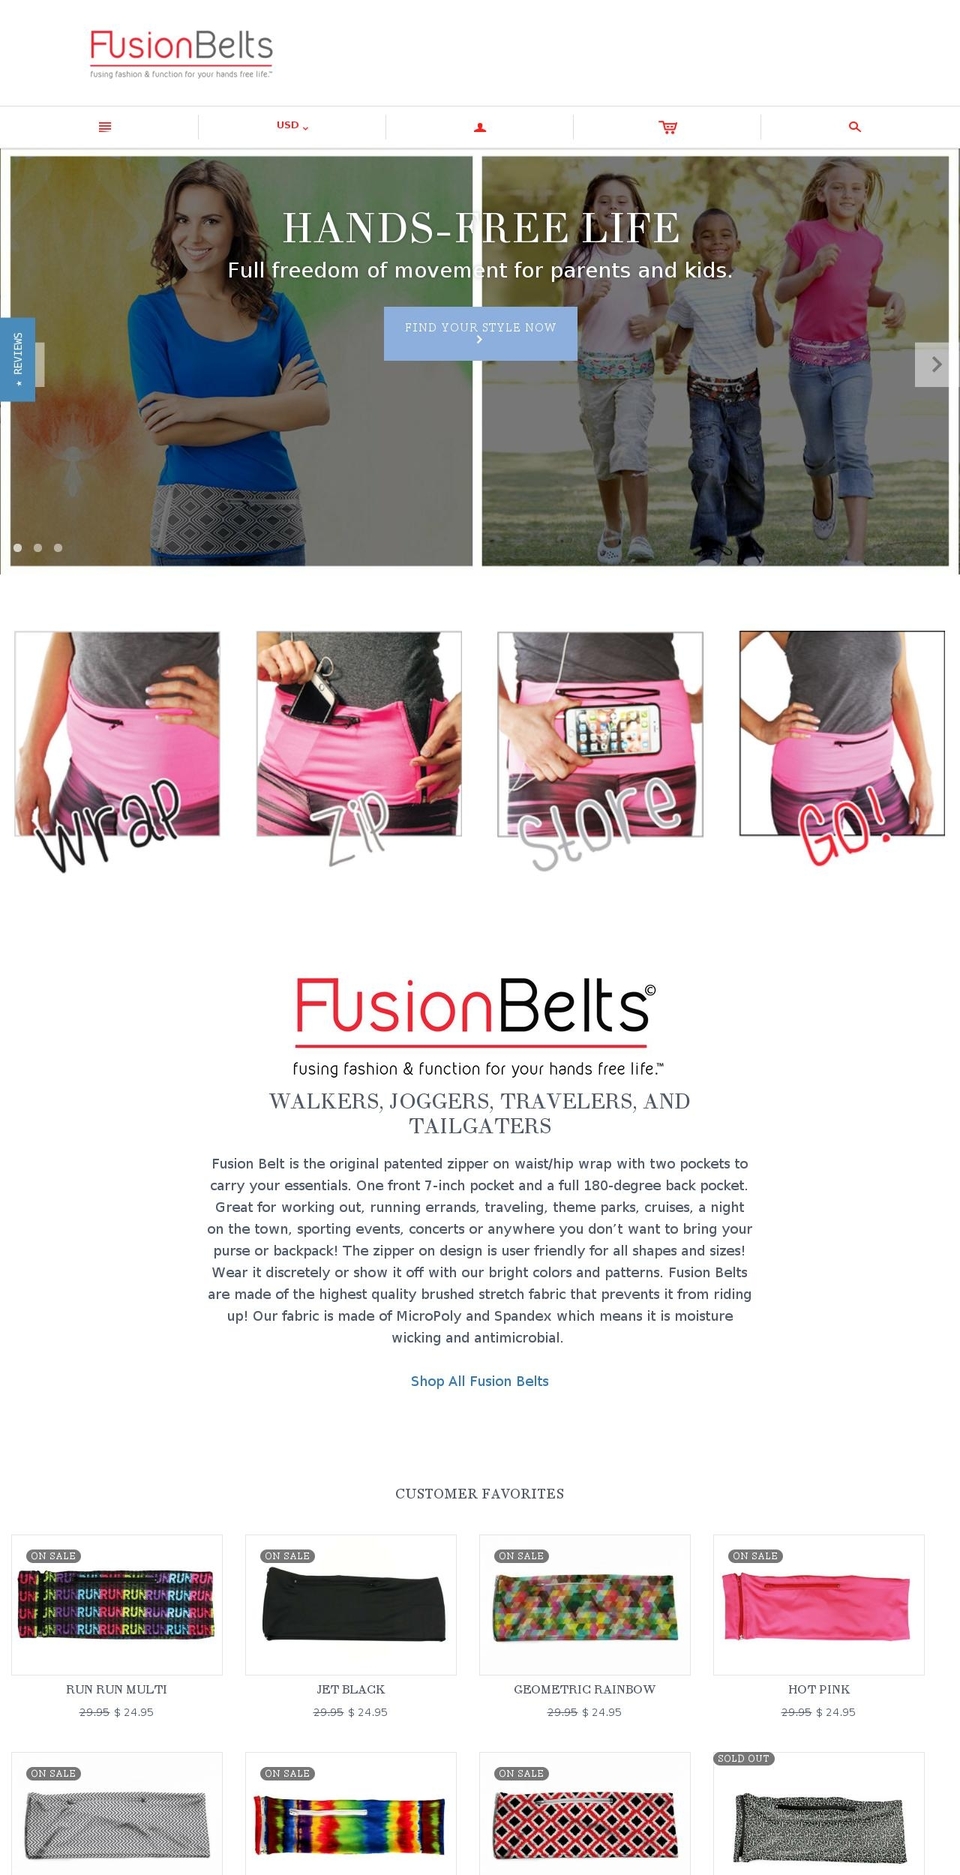 Fusion Belts - 08 May 2018 Shopify theme site example myfusionbelts.com